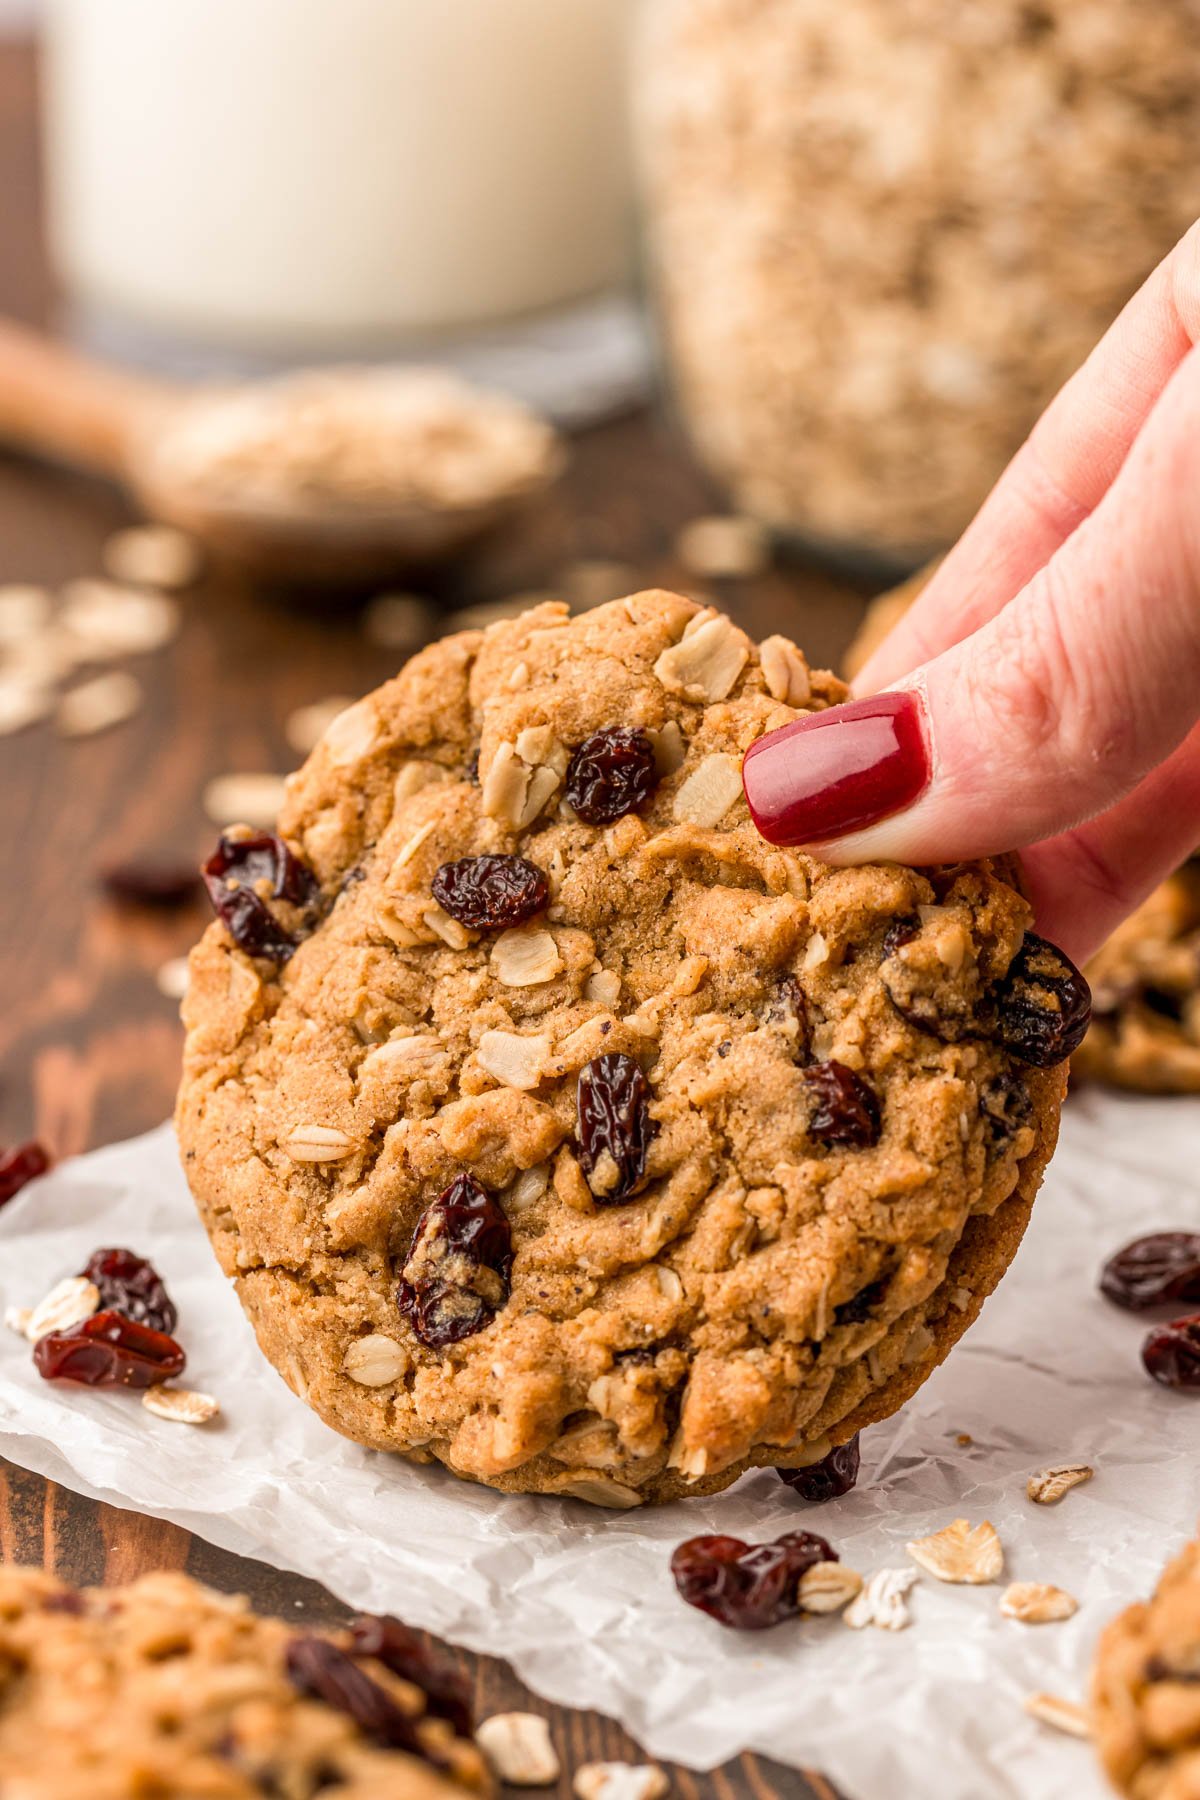 A woman's hand holding an oatmeal raisin cookie up off the table.